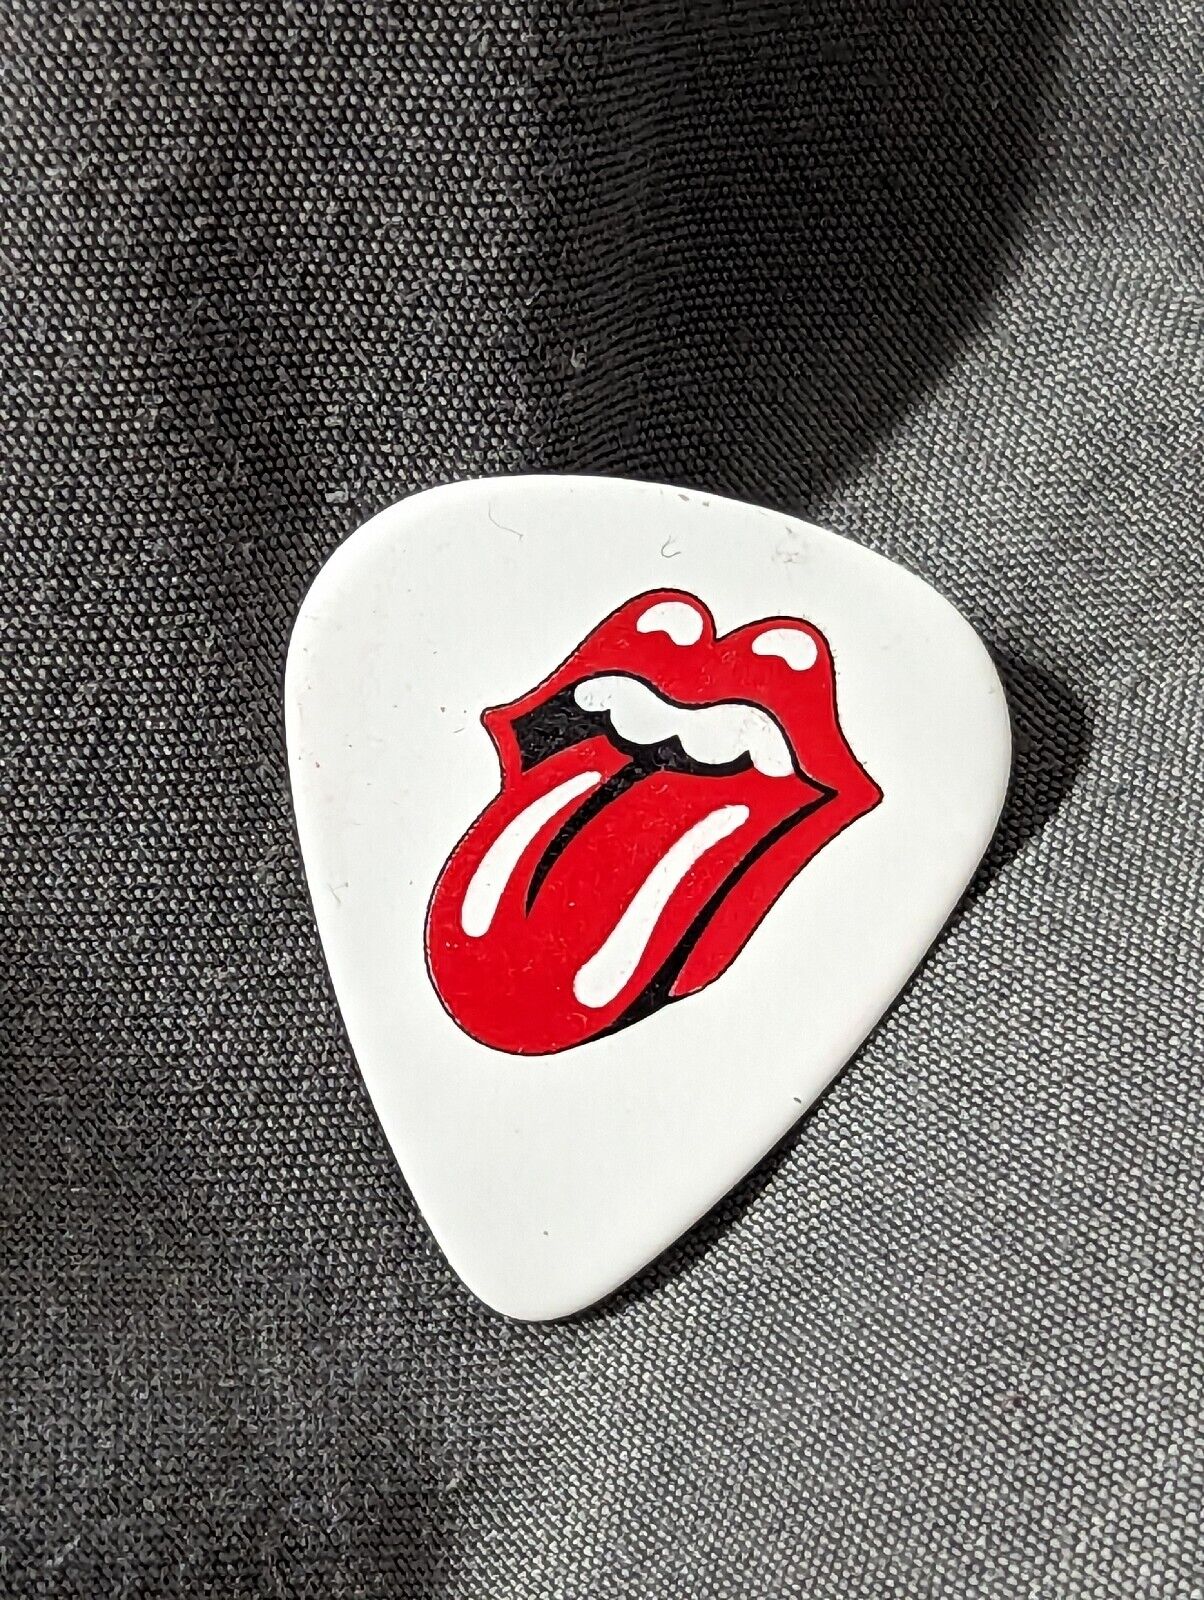 Personal Chuck Leavell 2019 guitar pick THE ROLLING STONES